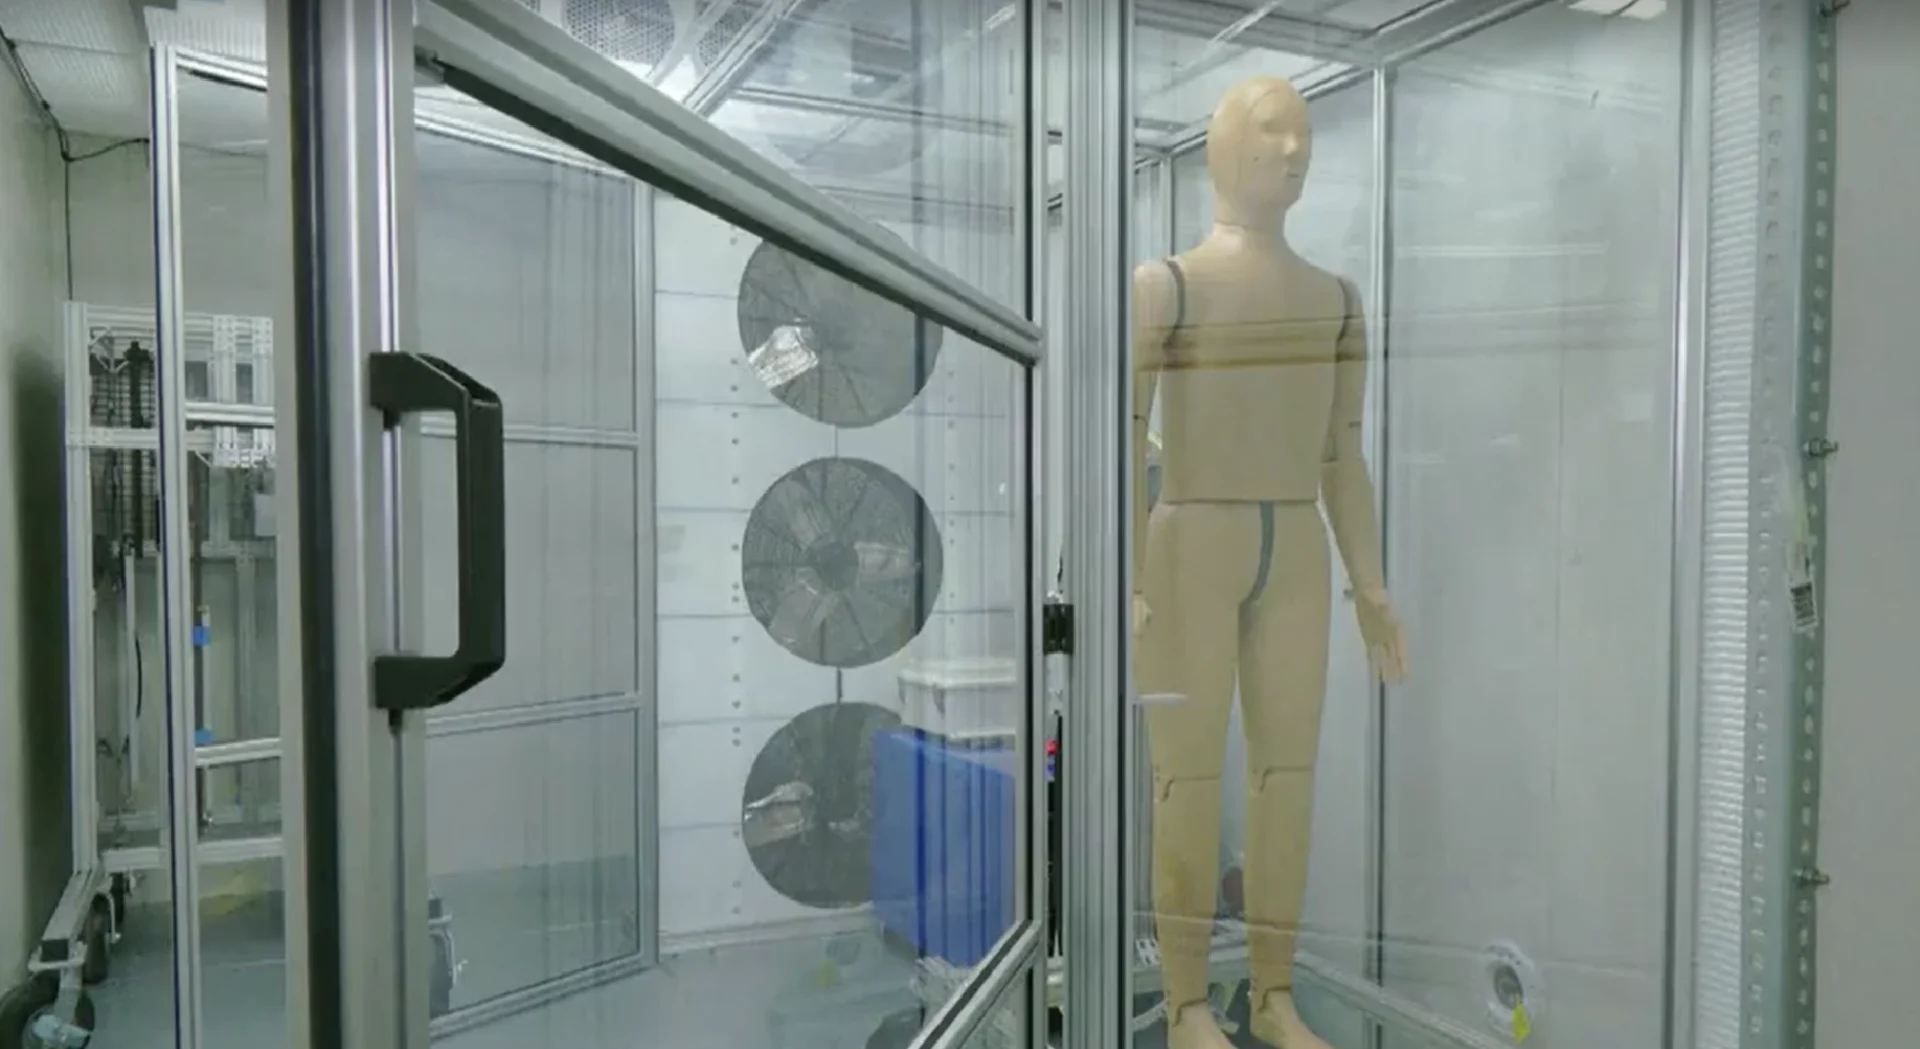 Meet ANDI, the sweating thermal dummy aiding research on heat-related illnesses